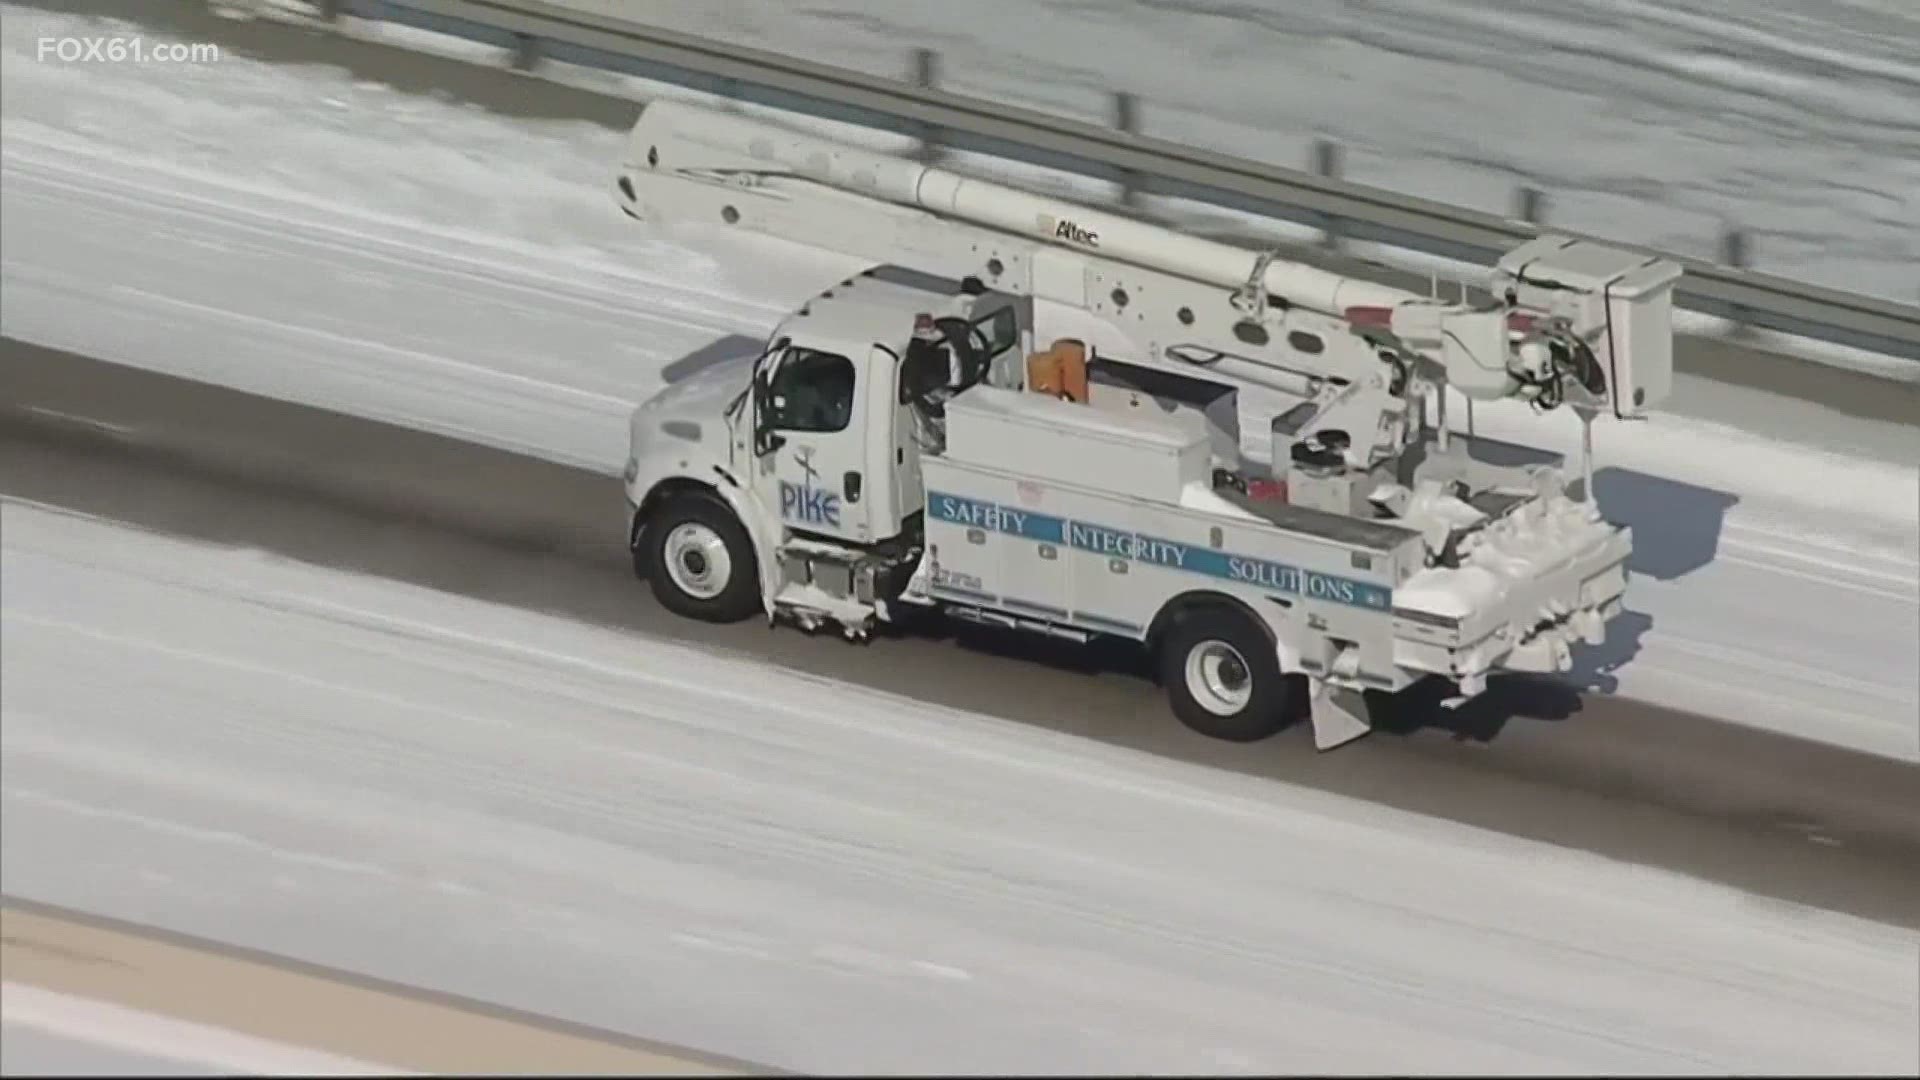 Millions are without power and in the cold as Texas faces rough rare winter weather